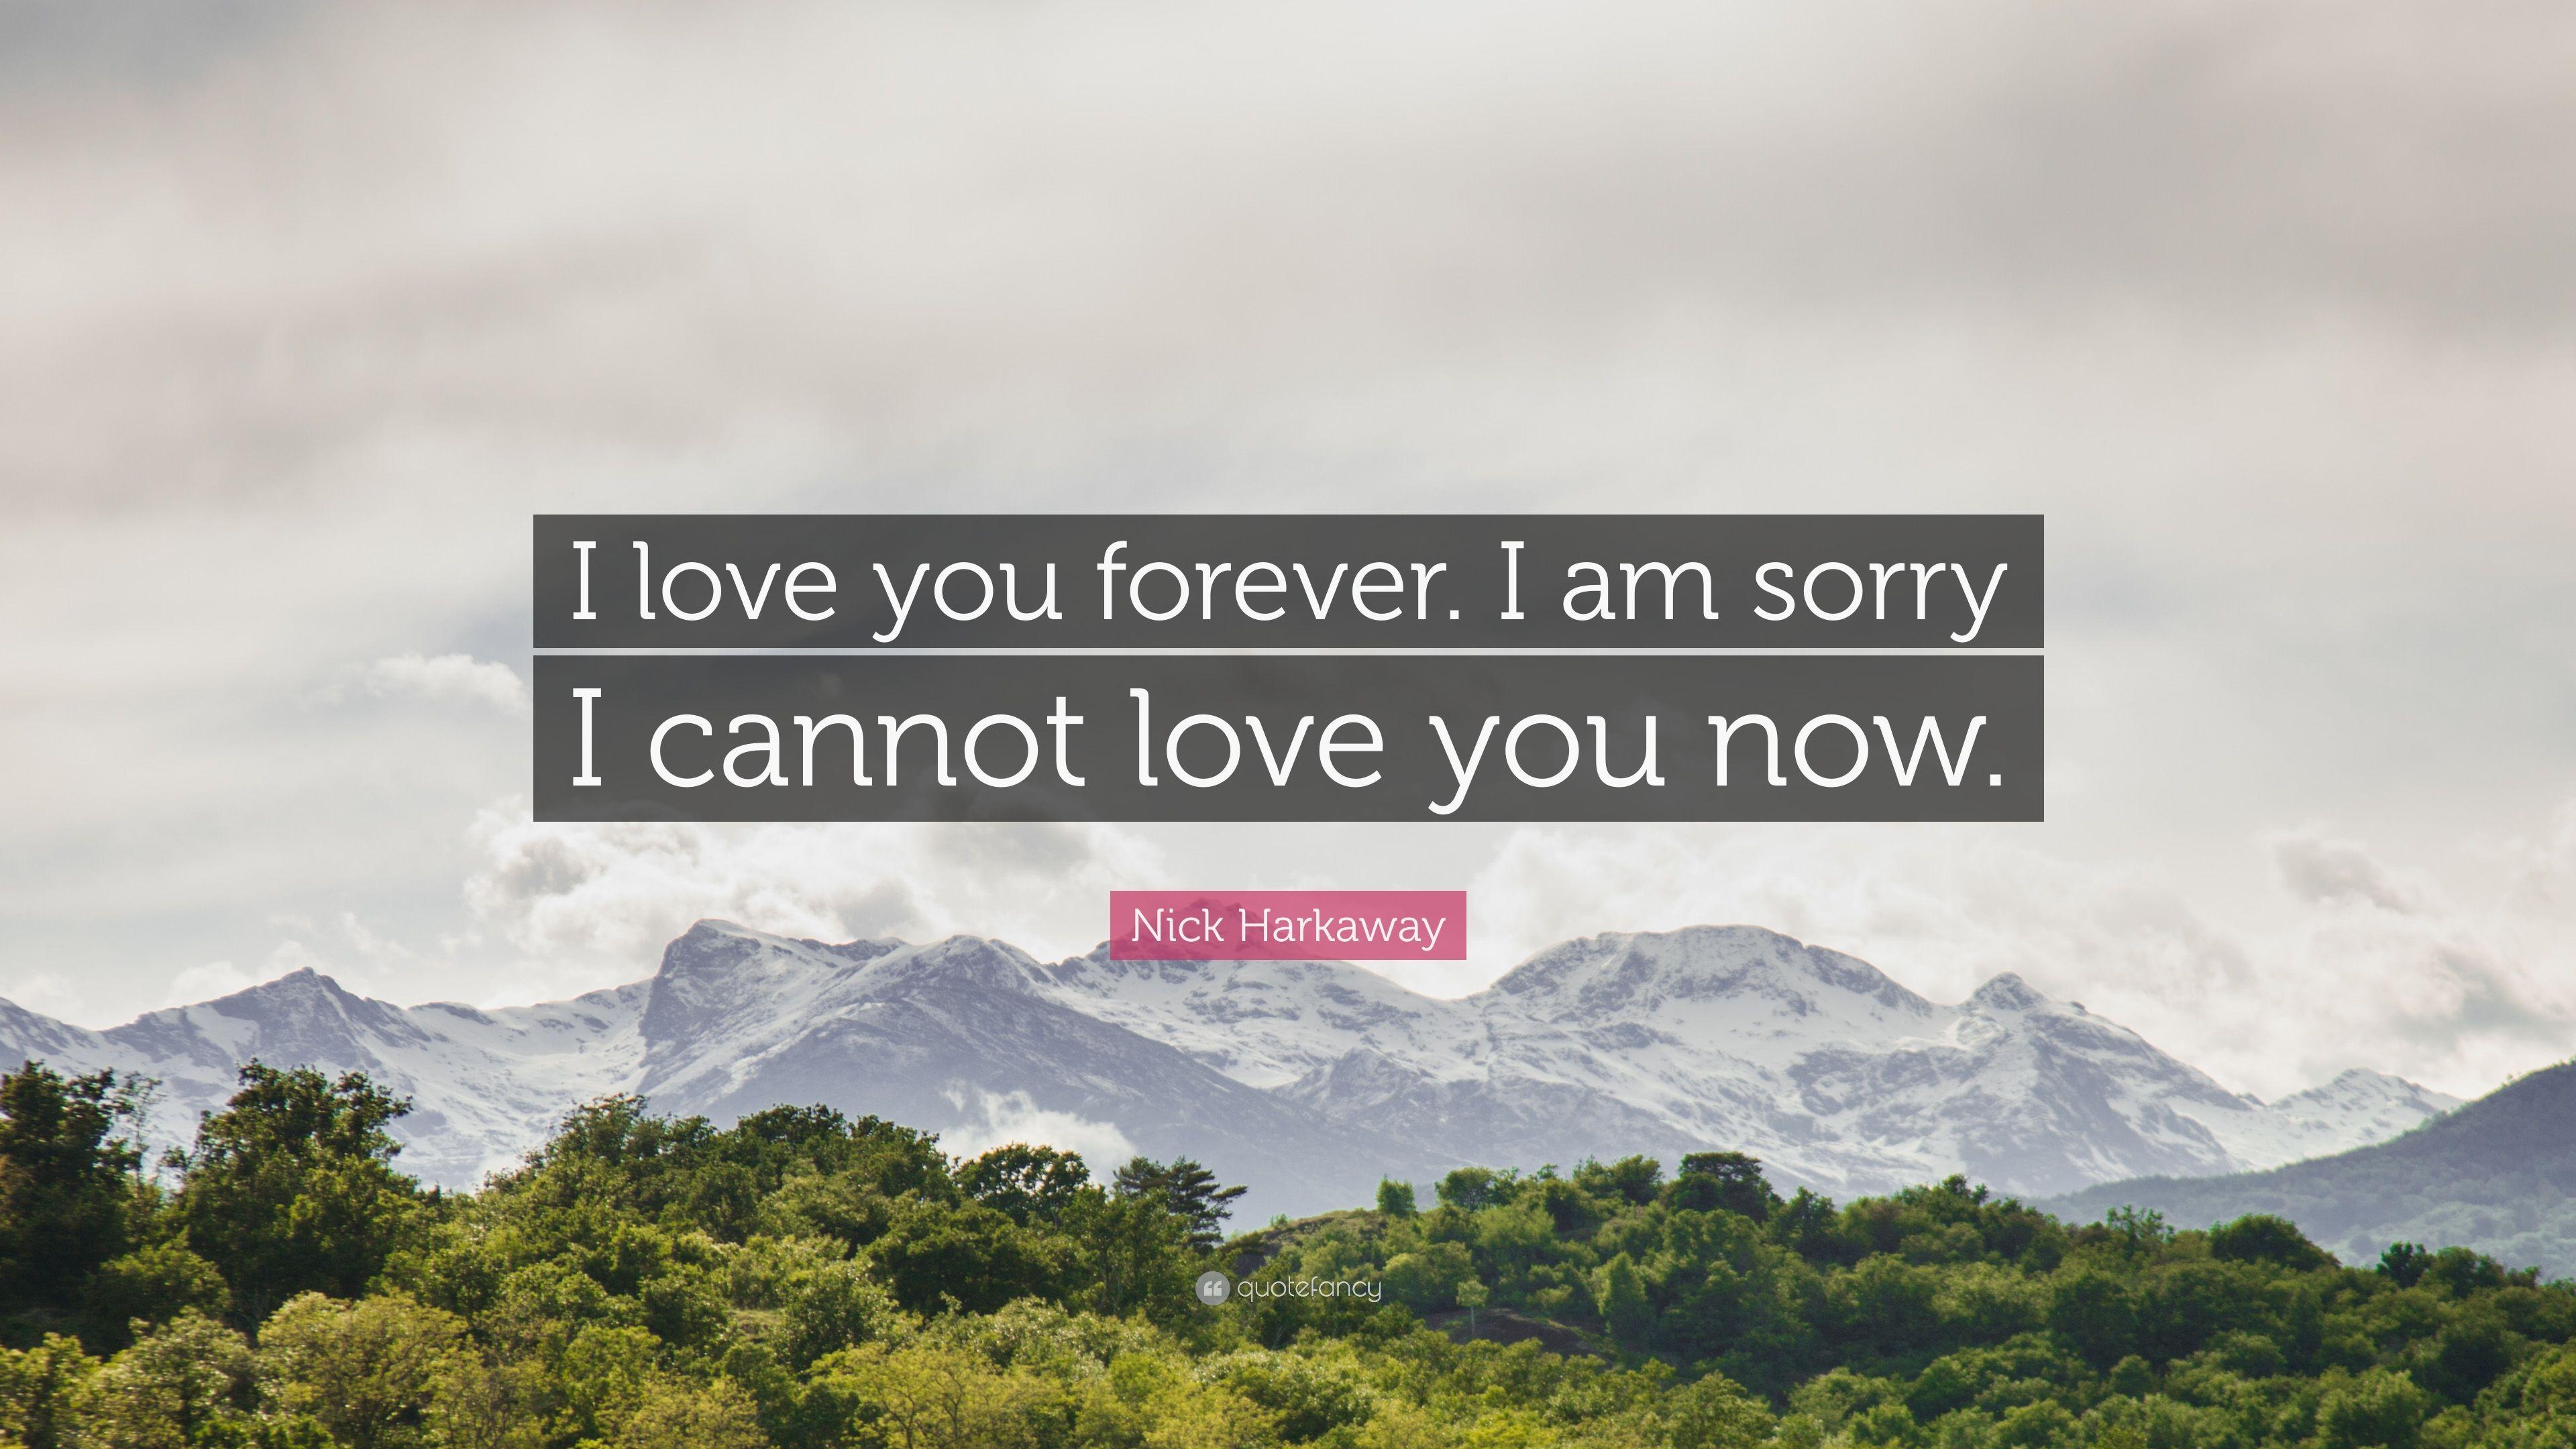 Nick Harkaway Quote: “I love you forever. I am sorry I cannot love